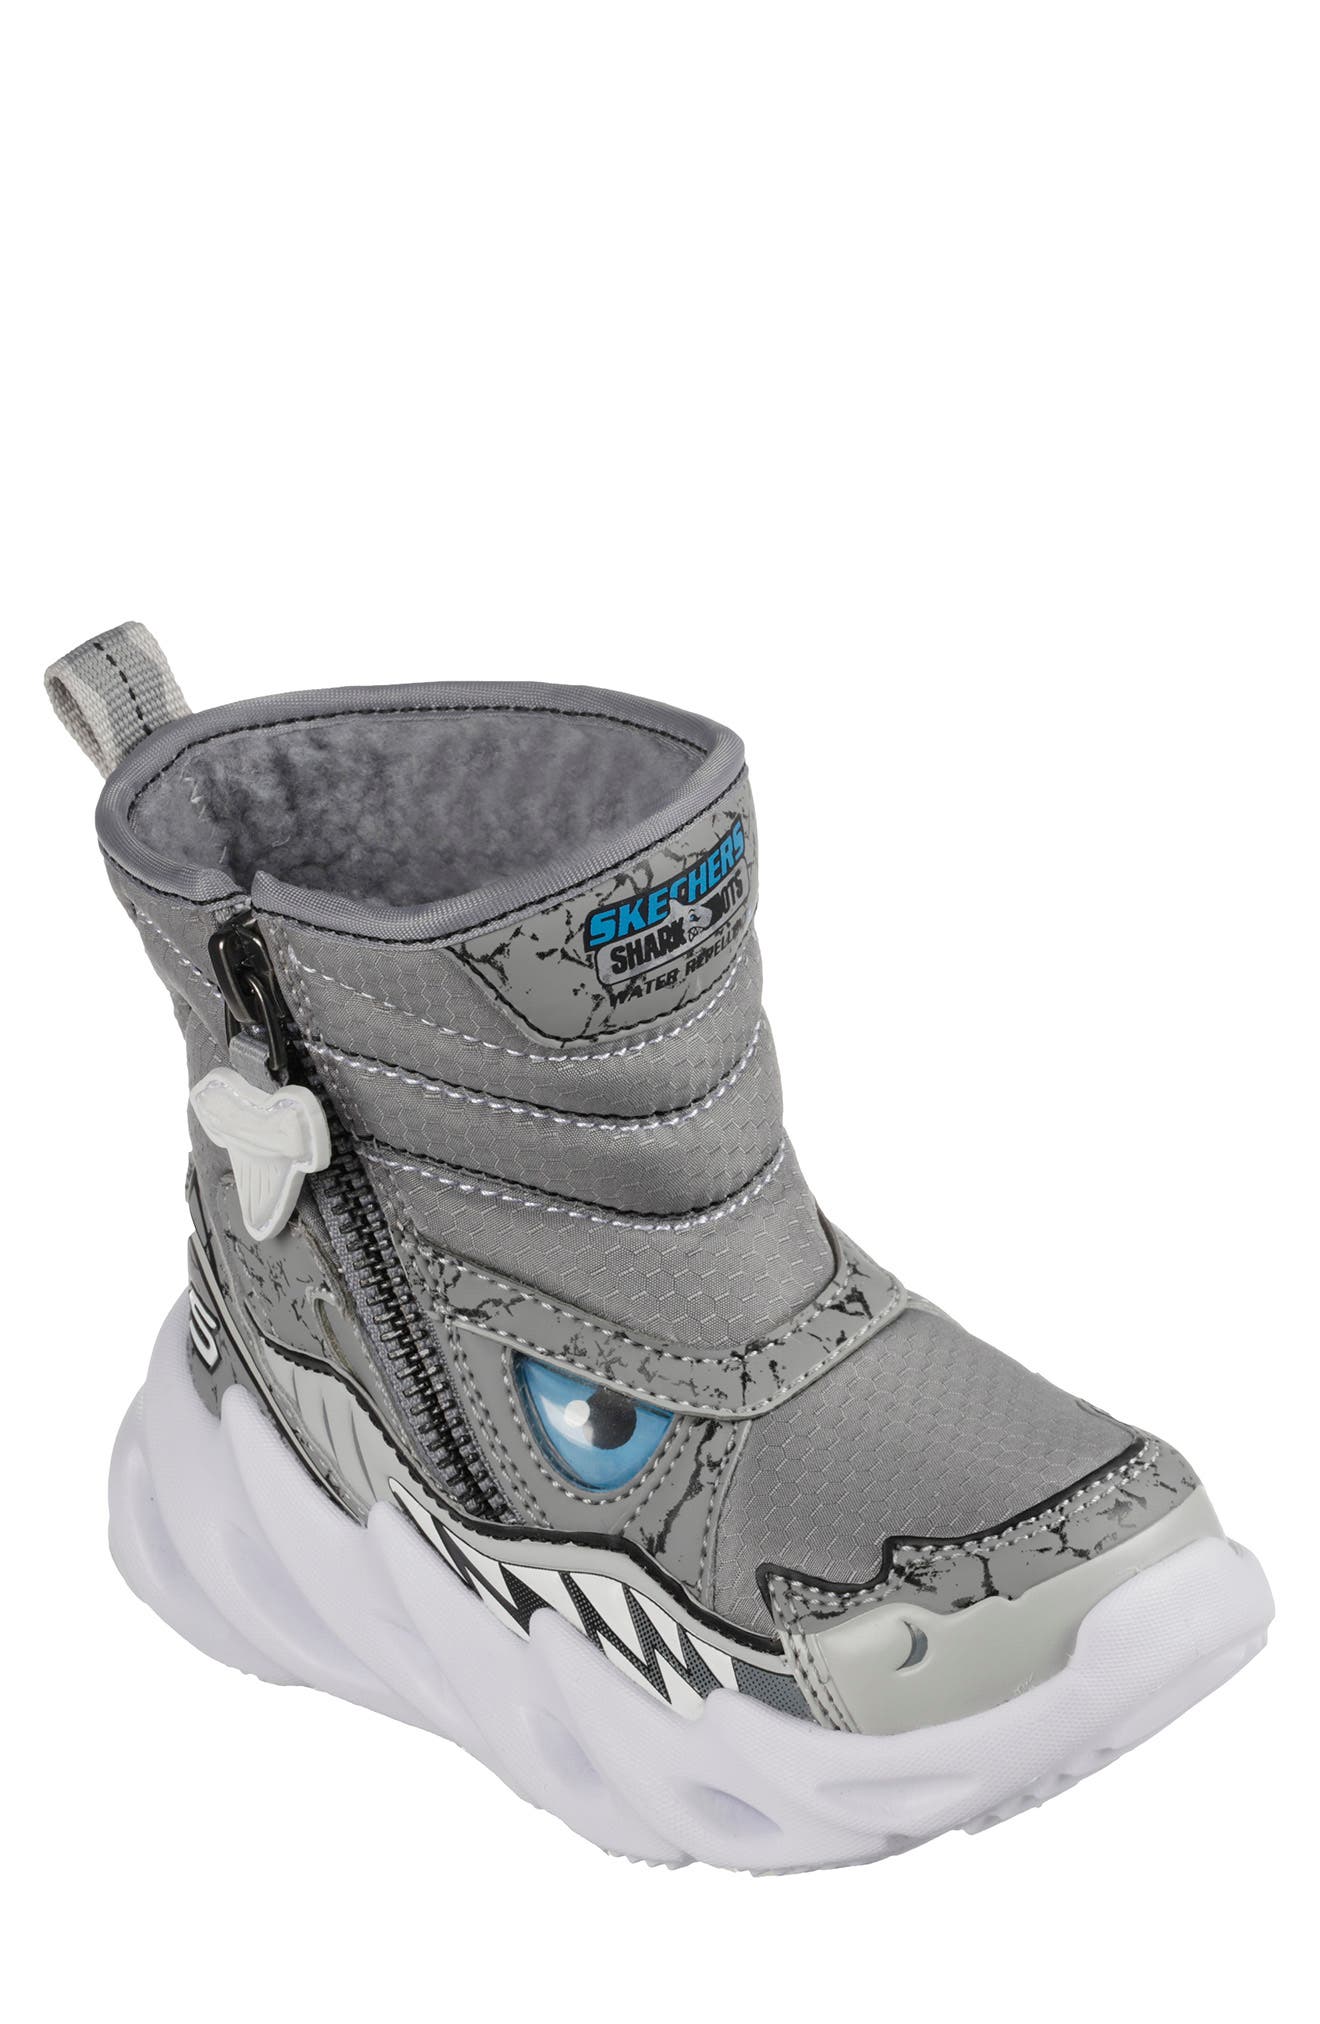 All Kids' SKECHERS Boots and Booties 